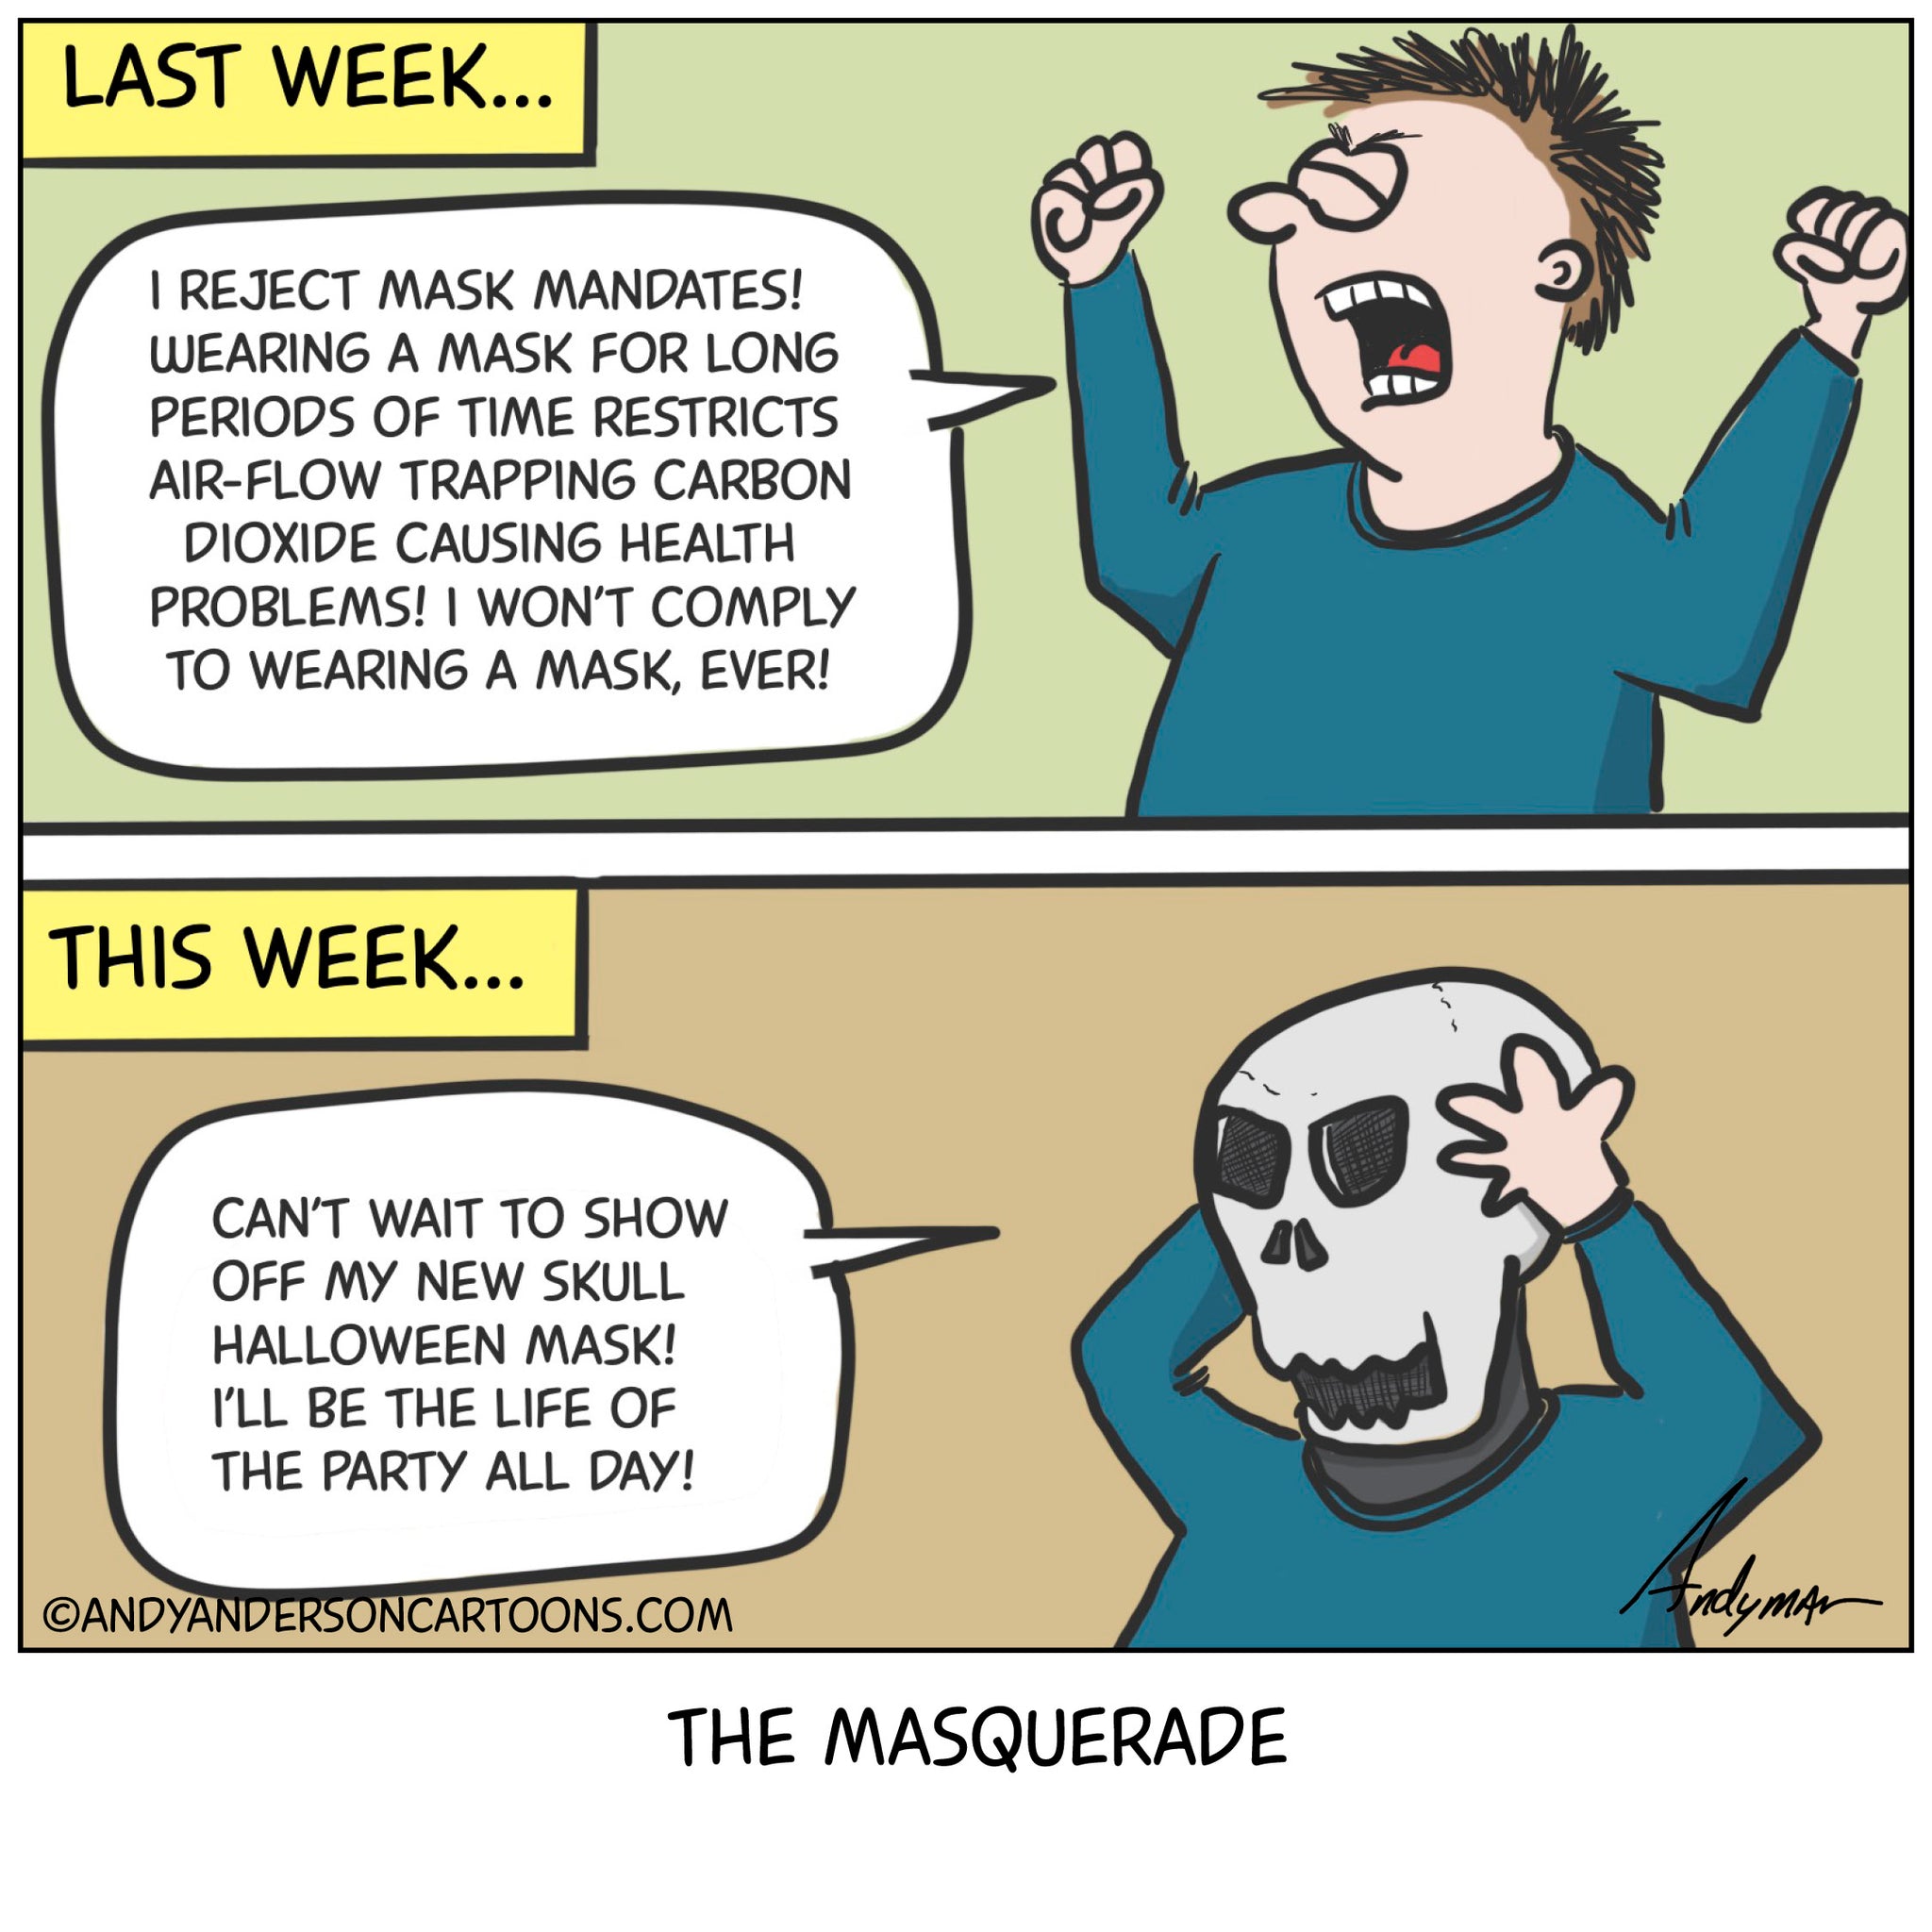 Cartoon about complaining about mask mandates but okay weraing a mask for Halloween by Andy Anderson